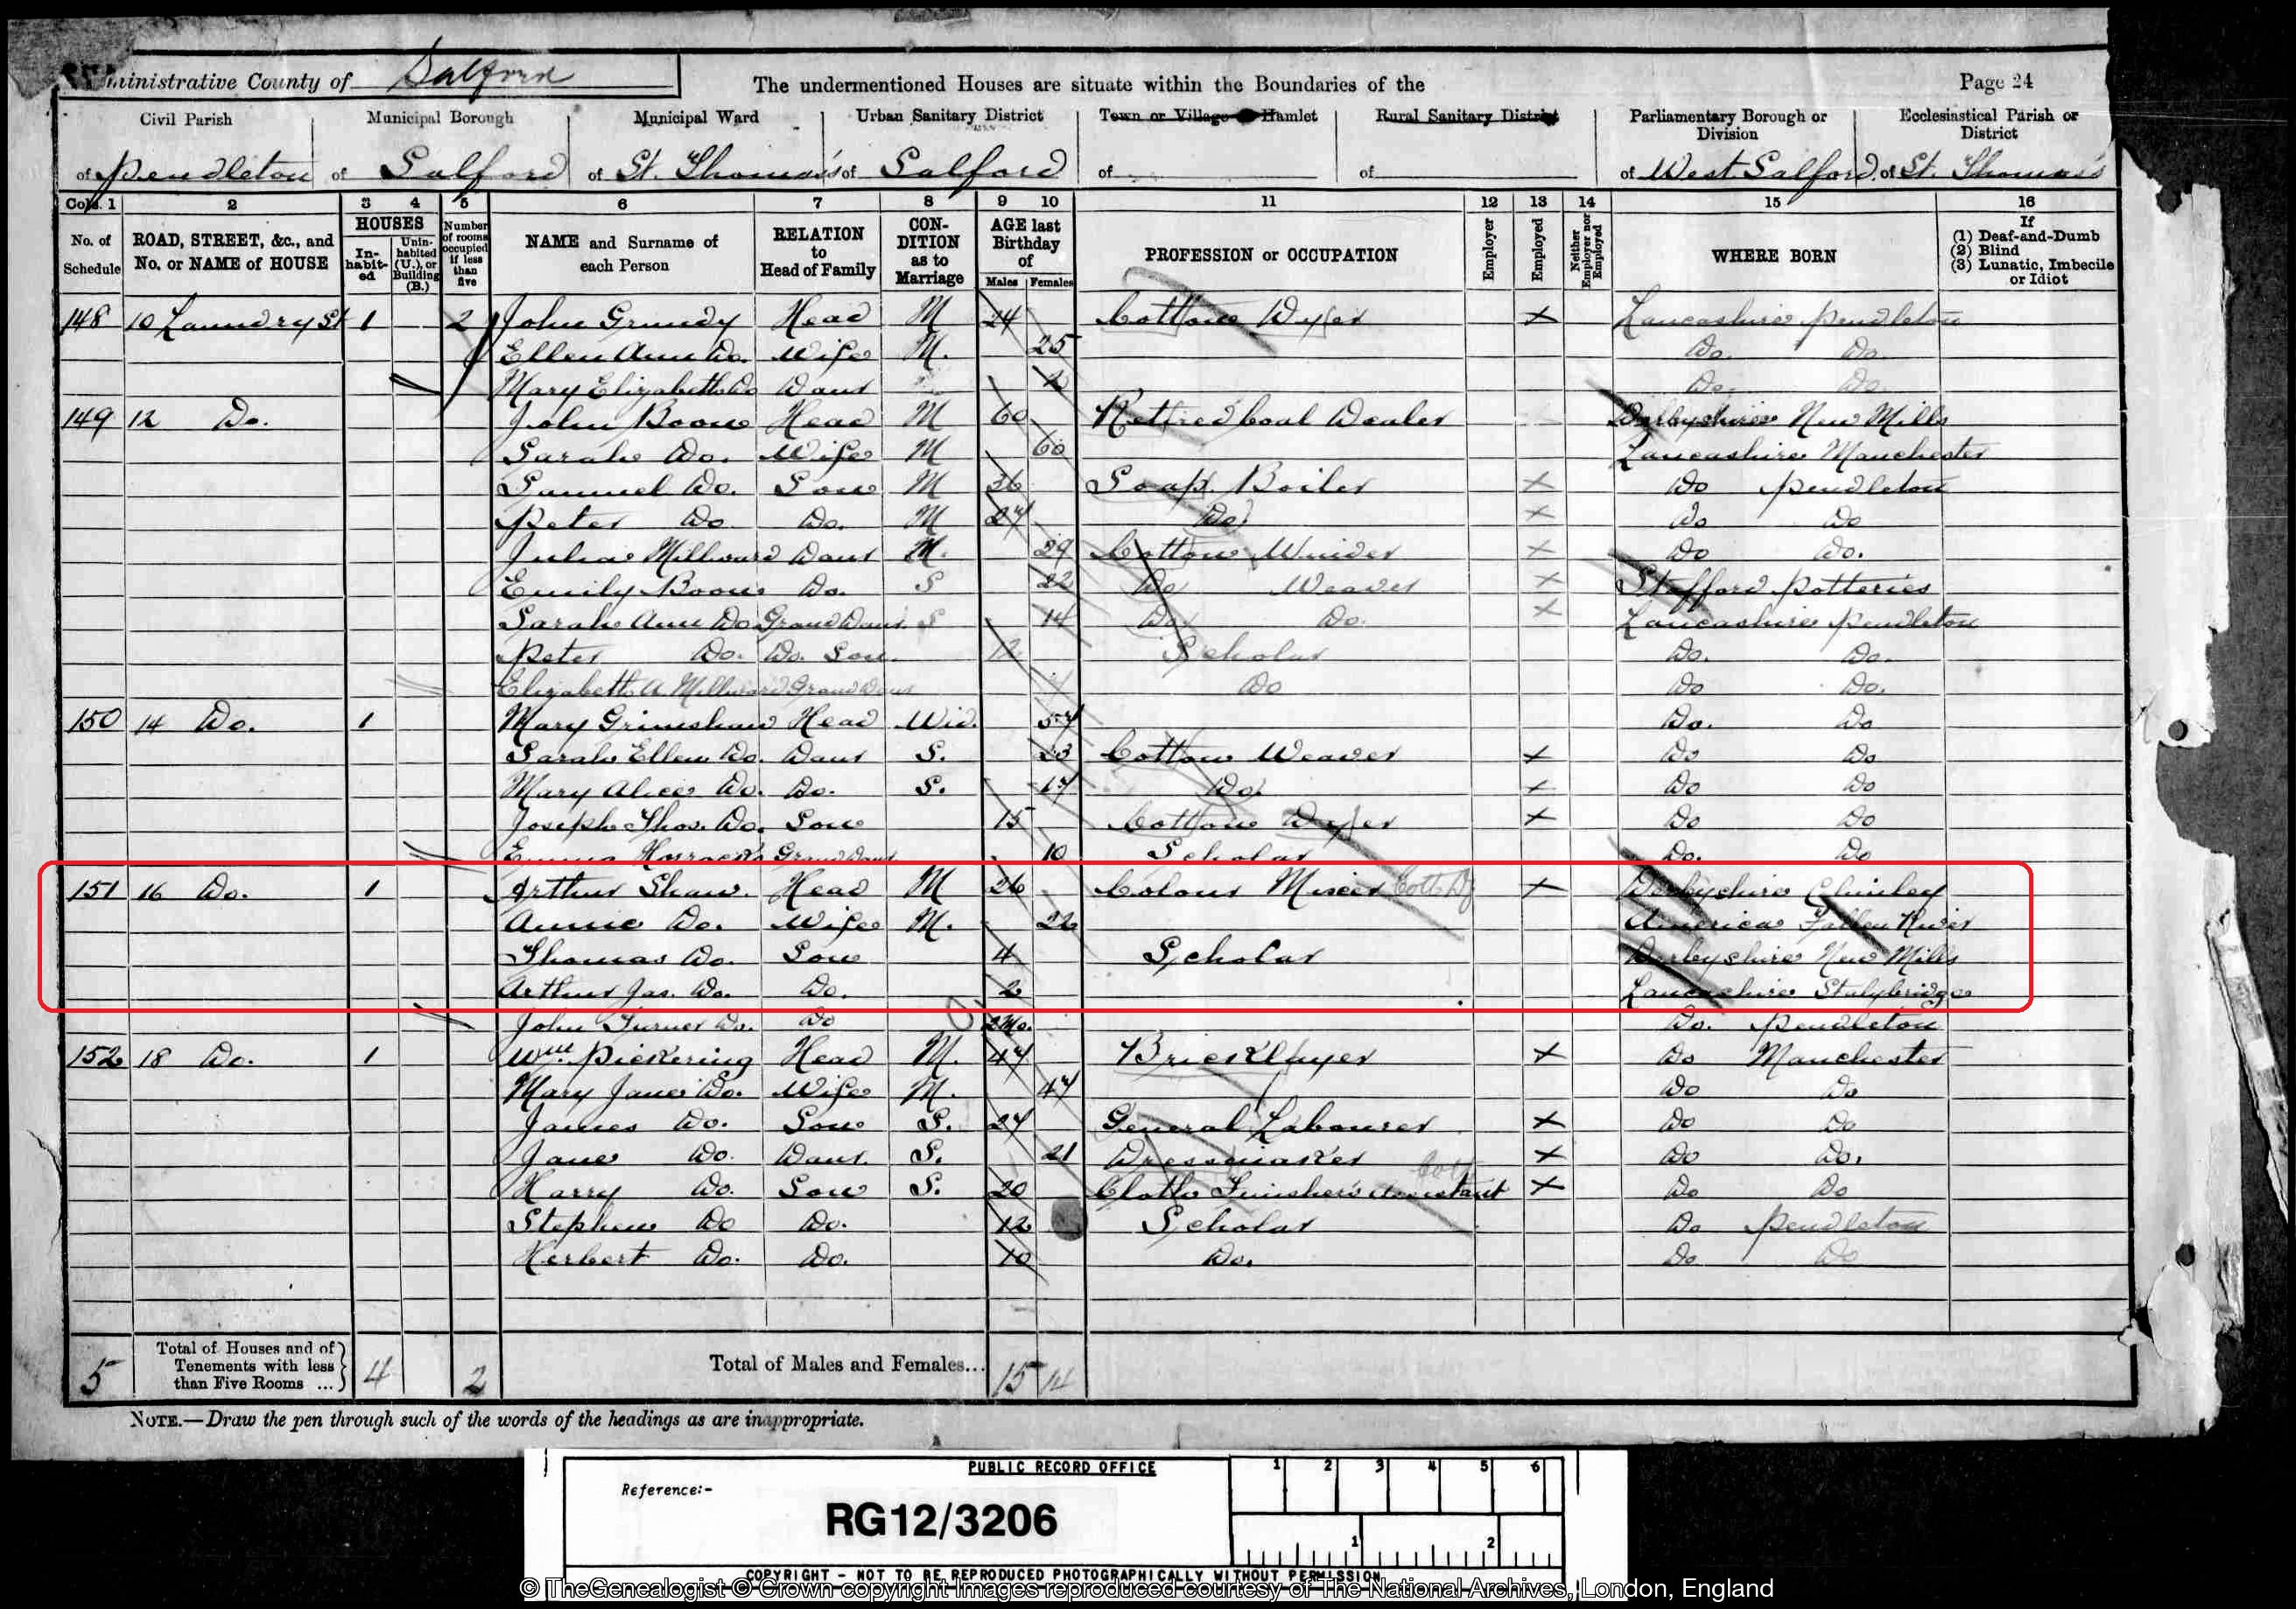 1891 census of Salford from TheGenealogist reveals that Sharon's great-grandmother had been born in the USA